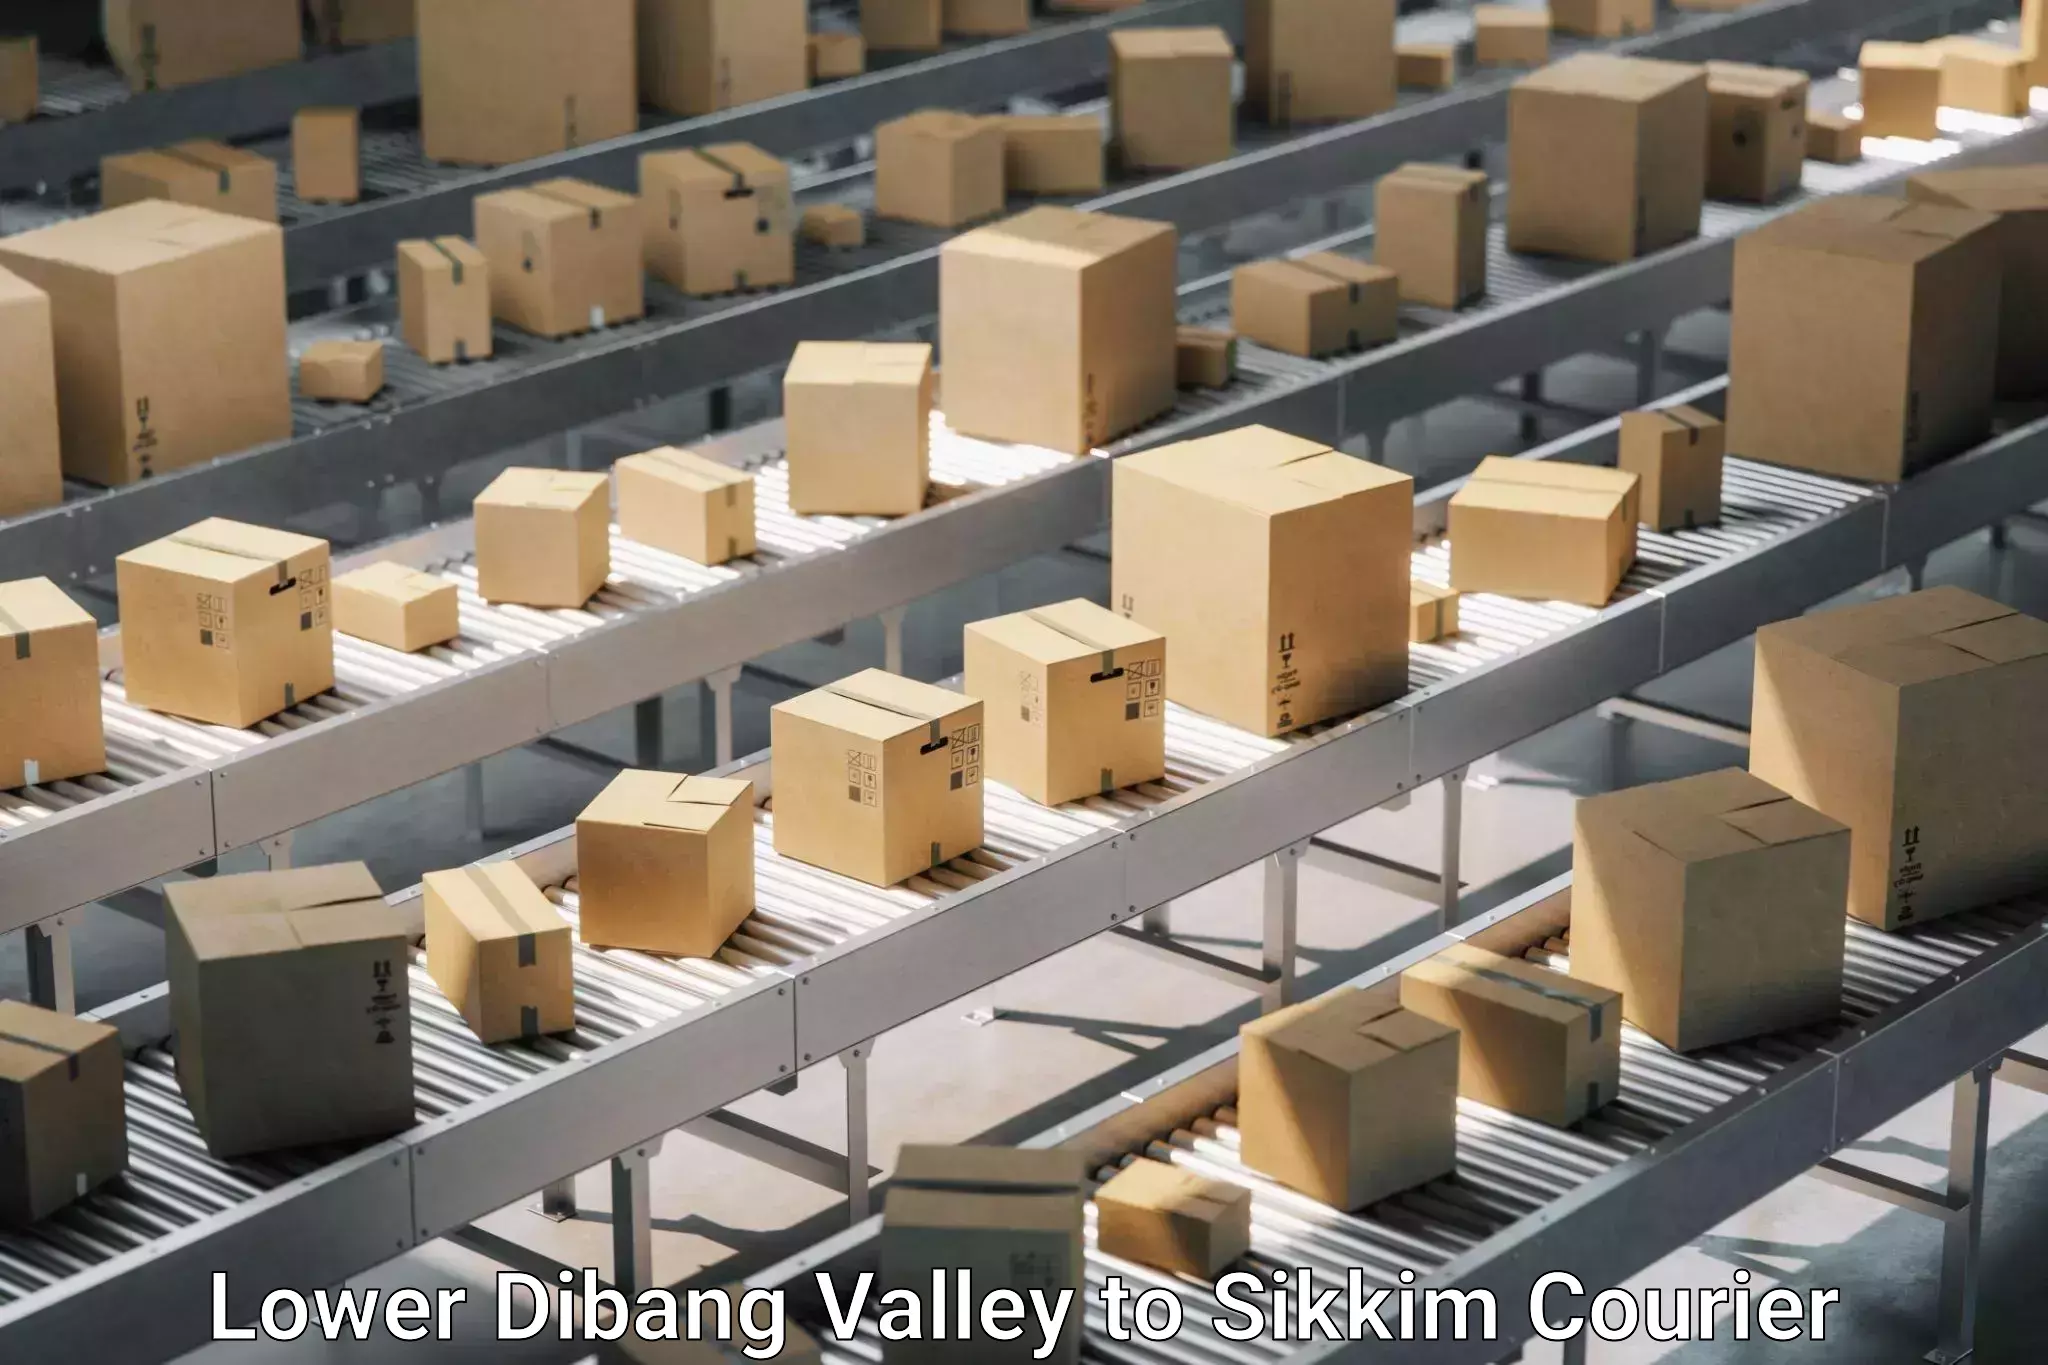 Skilled movers in Lower Dibang Valley to East Sikkim